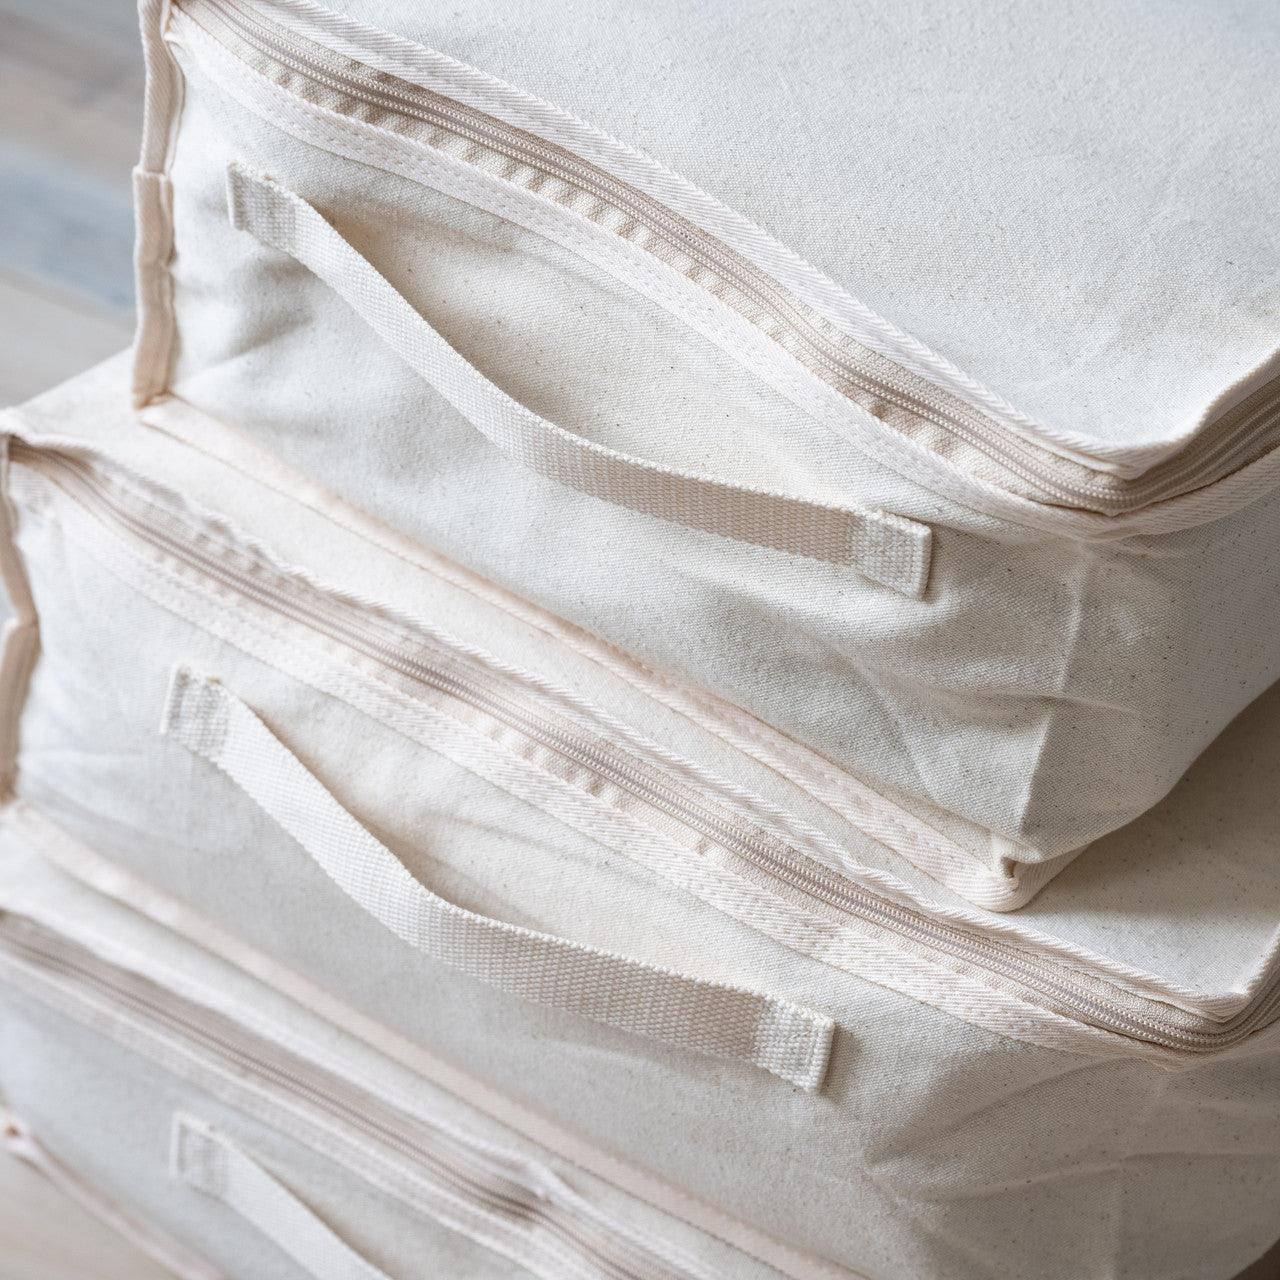 Clothing Storage Bags - 10oz Thick With 100% Pure Cotton - Medium - Hangersforless